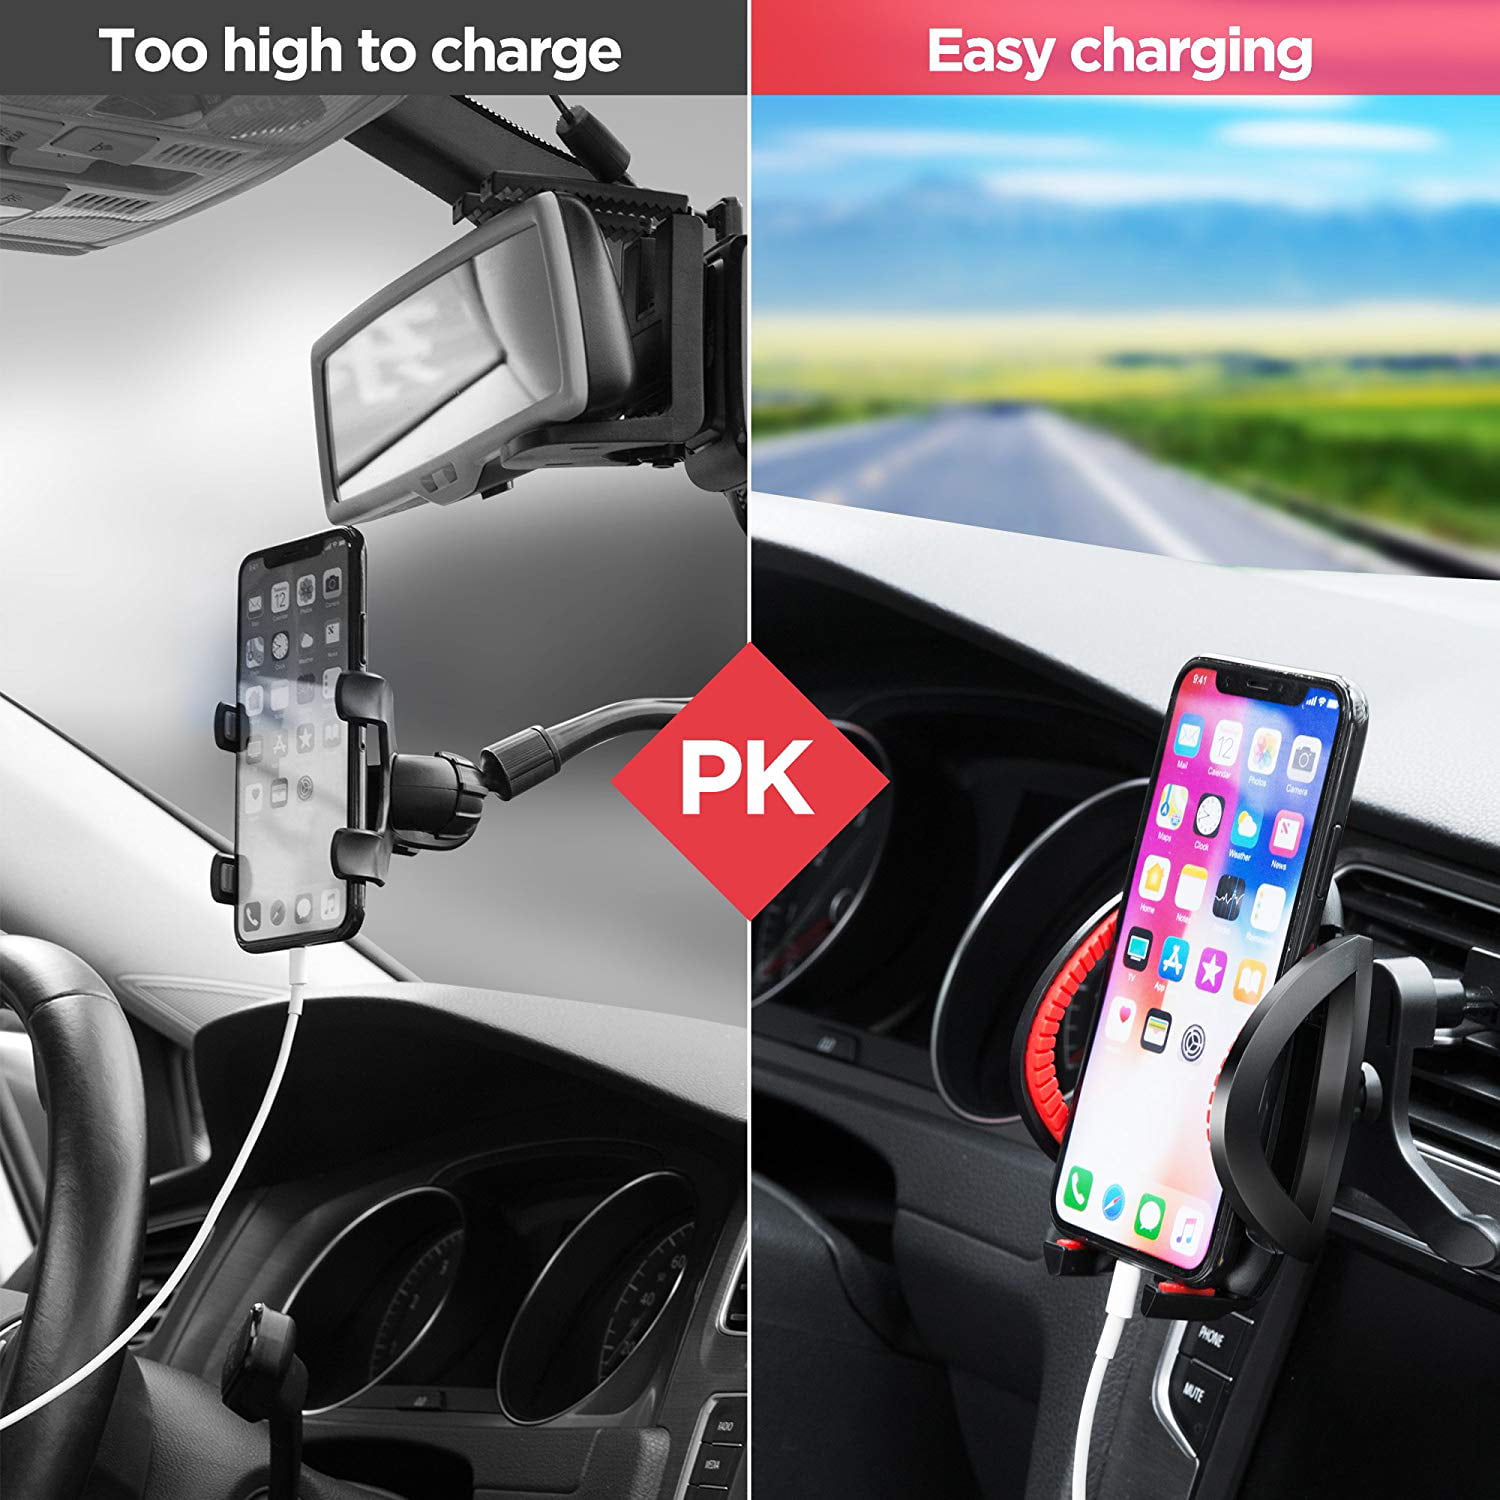 Ipow Car Phone Mount Holder Hands Free Car Phone Holder Dashboard Gravity Cell Phone Holder Mount with Auto Retractable Clamp Maximum Angle